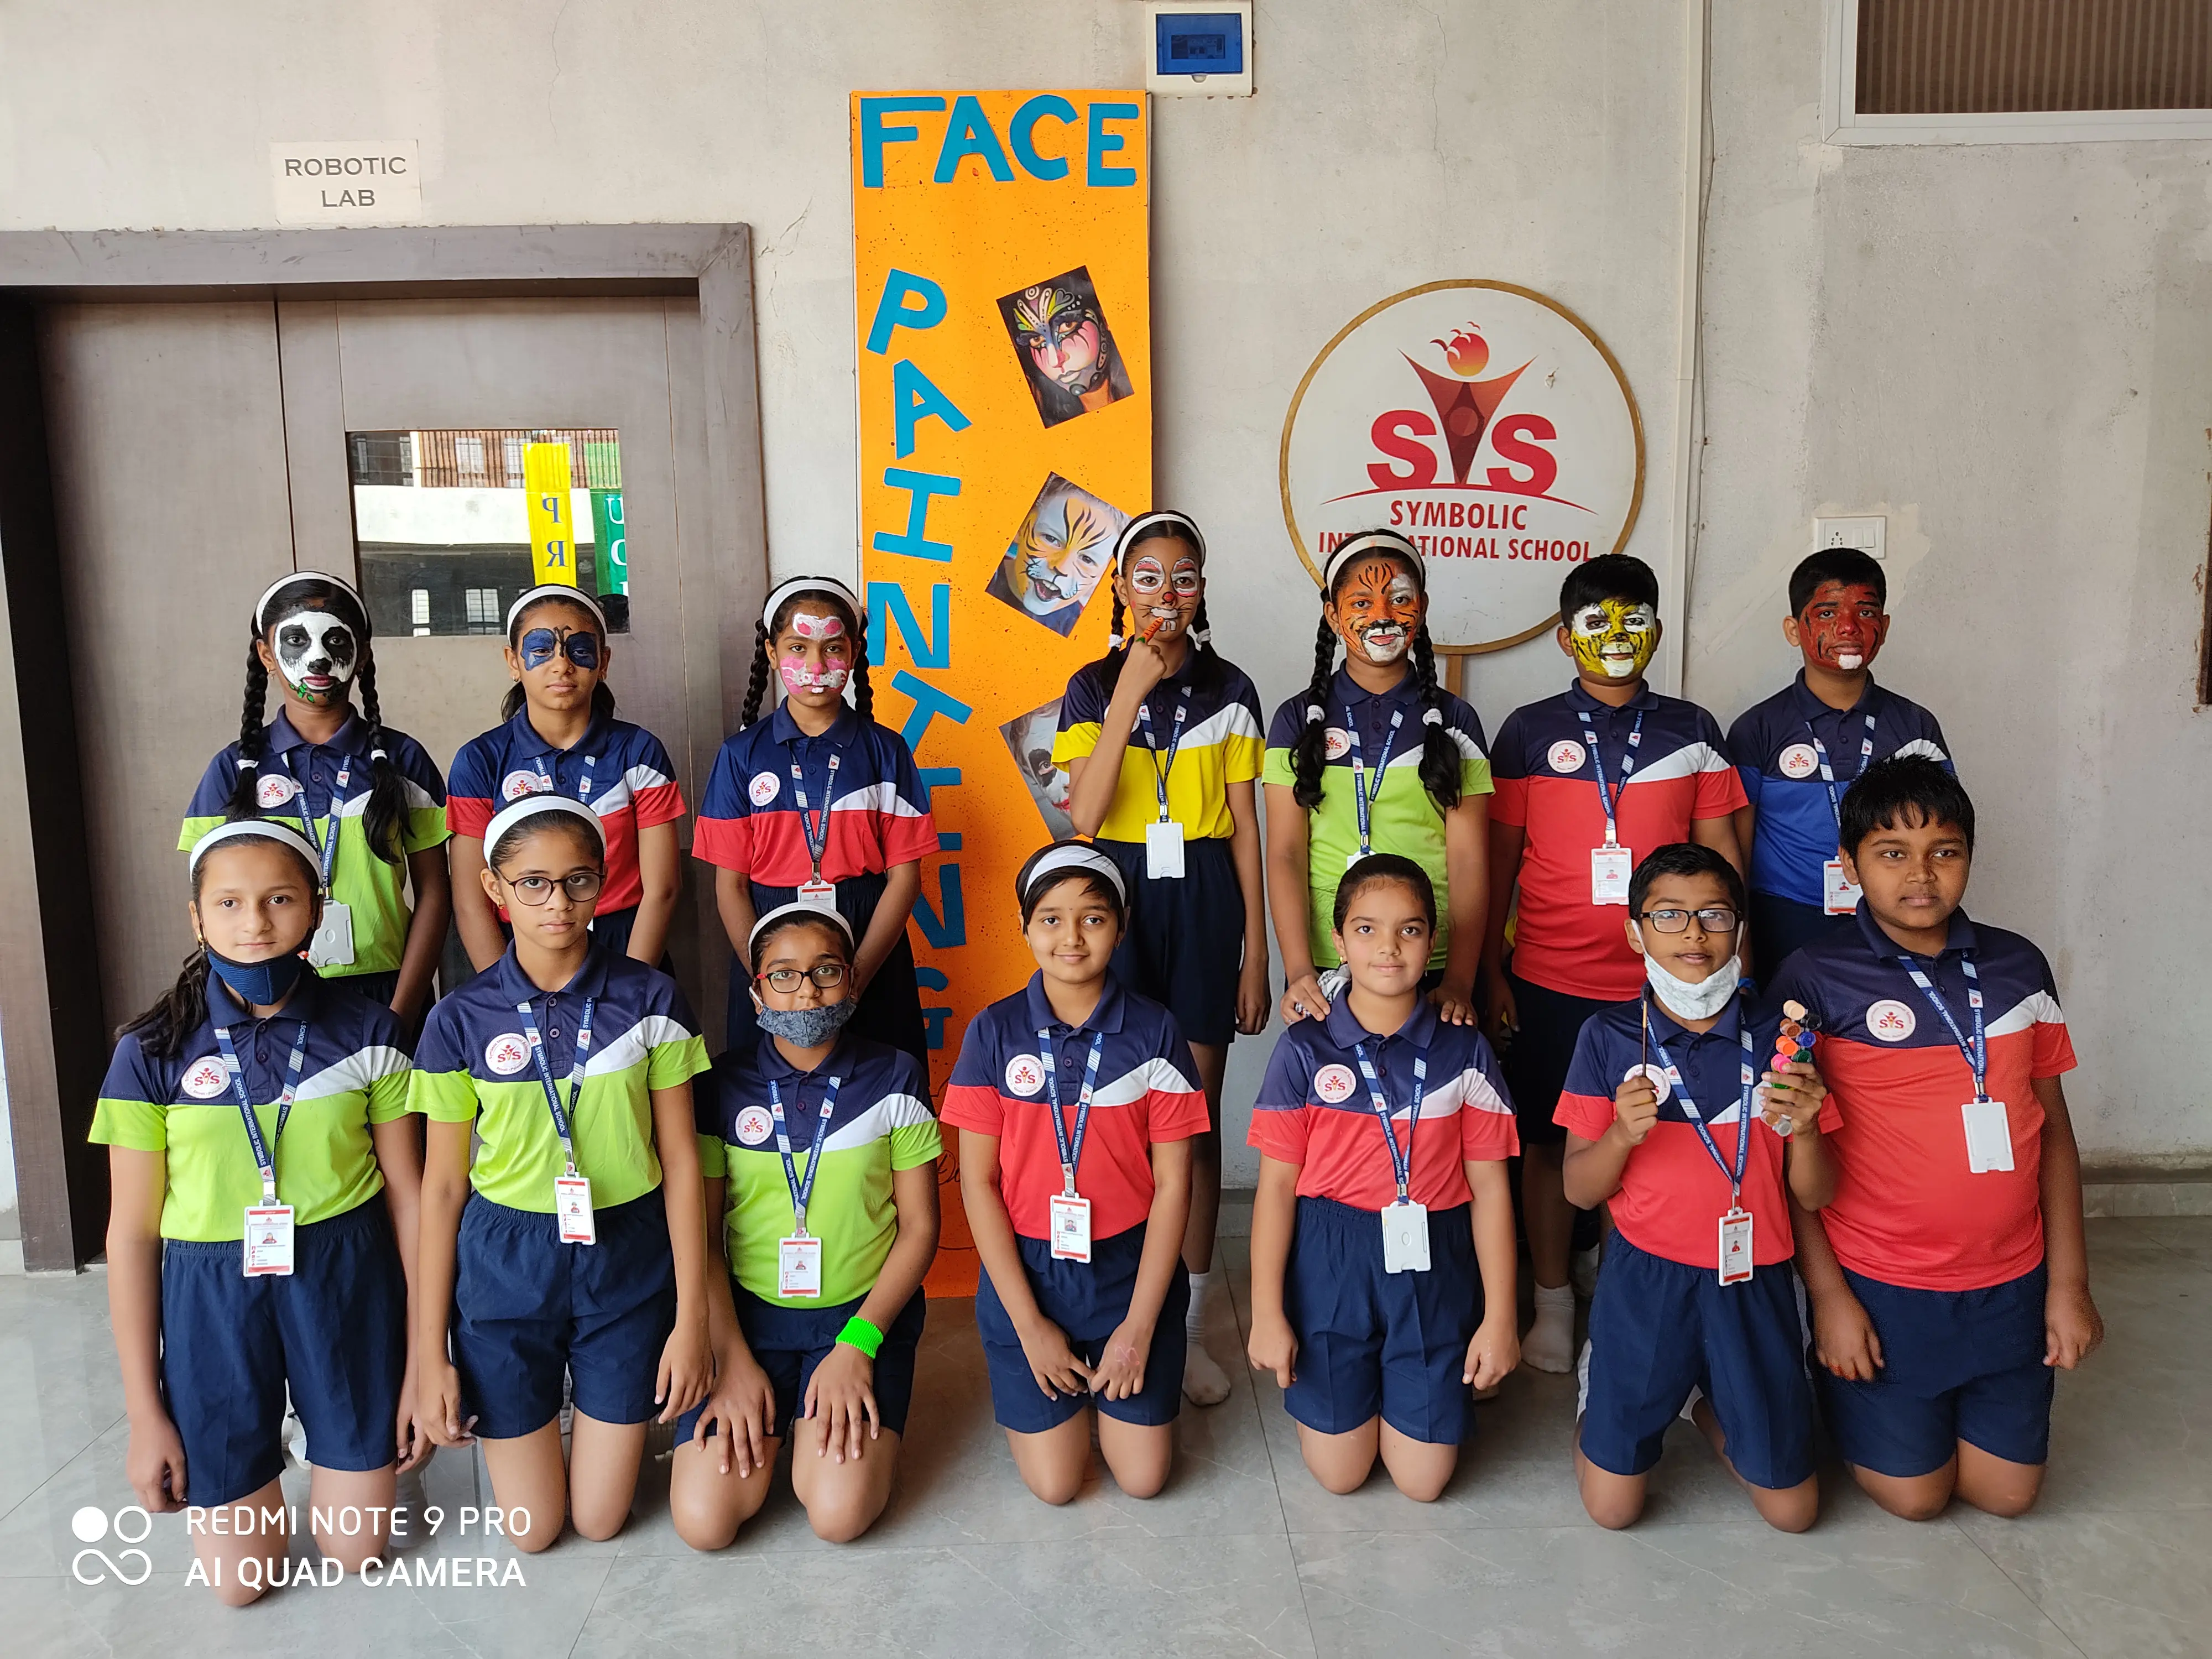 FACE PAINTING COMPETITION 2021